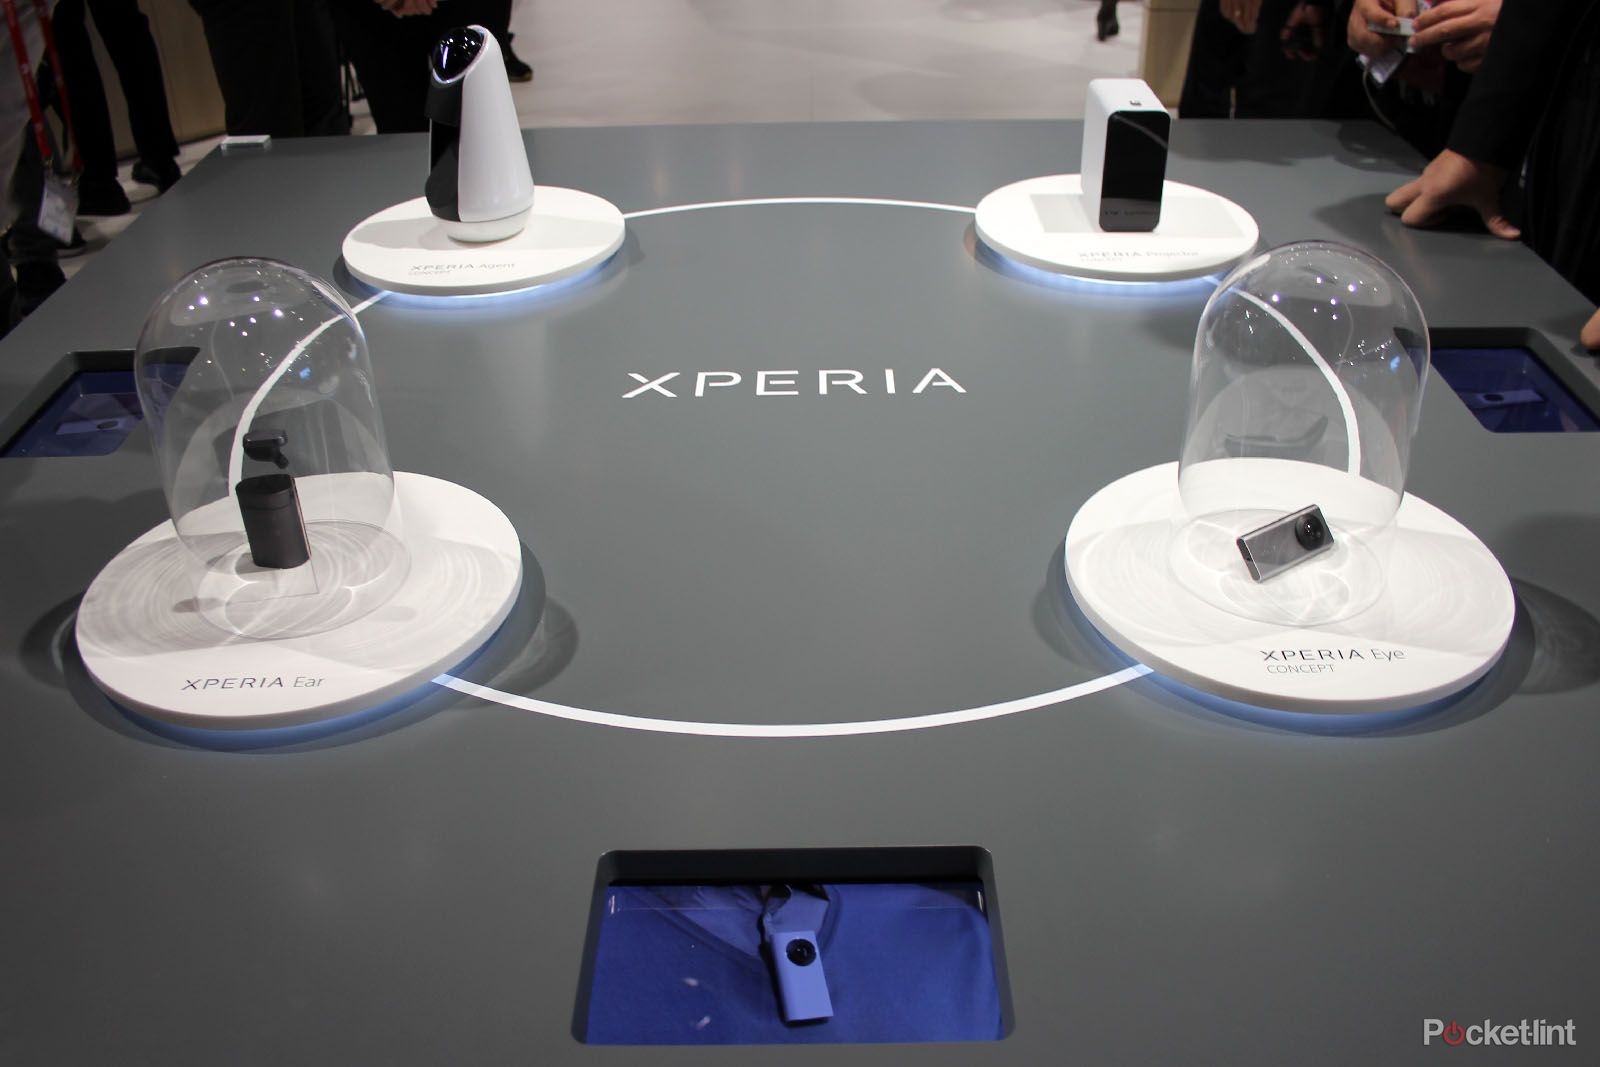 sony xperia eye projector agent concept visions of a connected future image 1